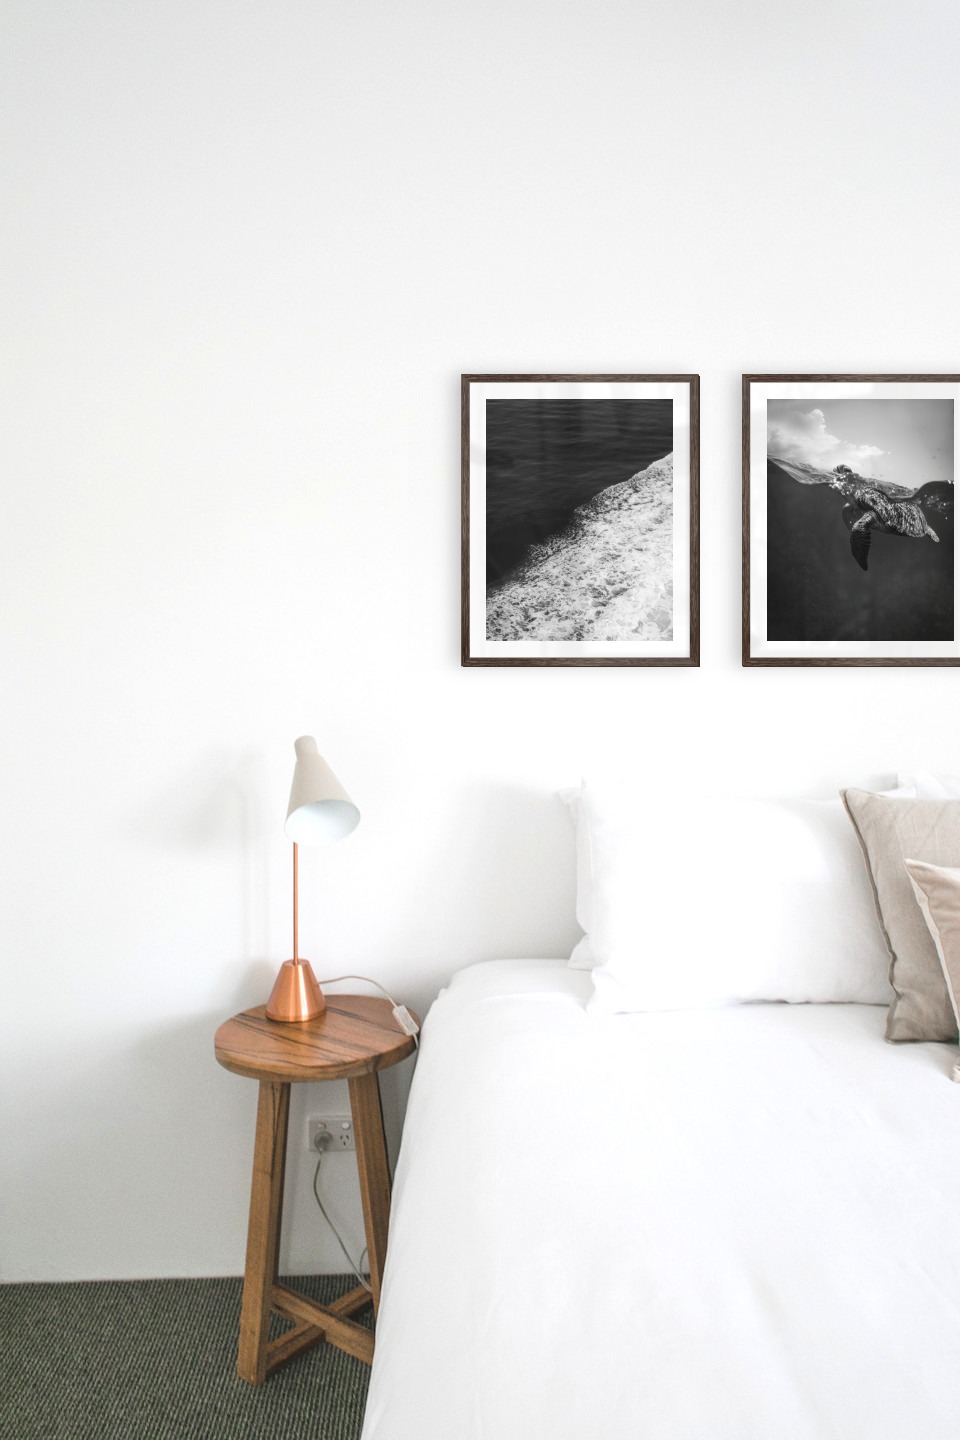 Gallery wall with picture frames in dark wood in sizes 40x50 with prints "Swell from waves" and "Turtle"